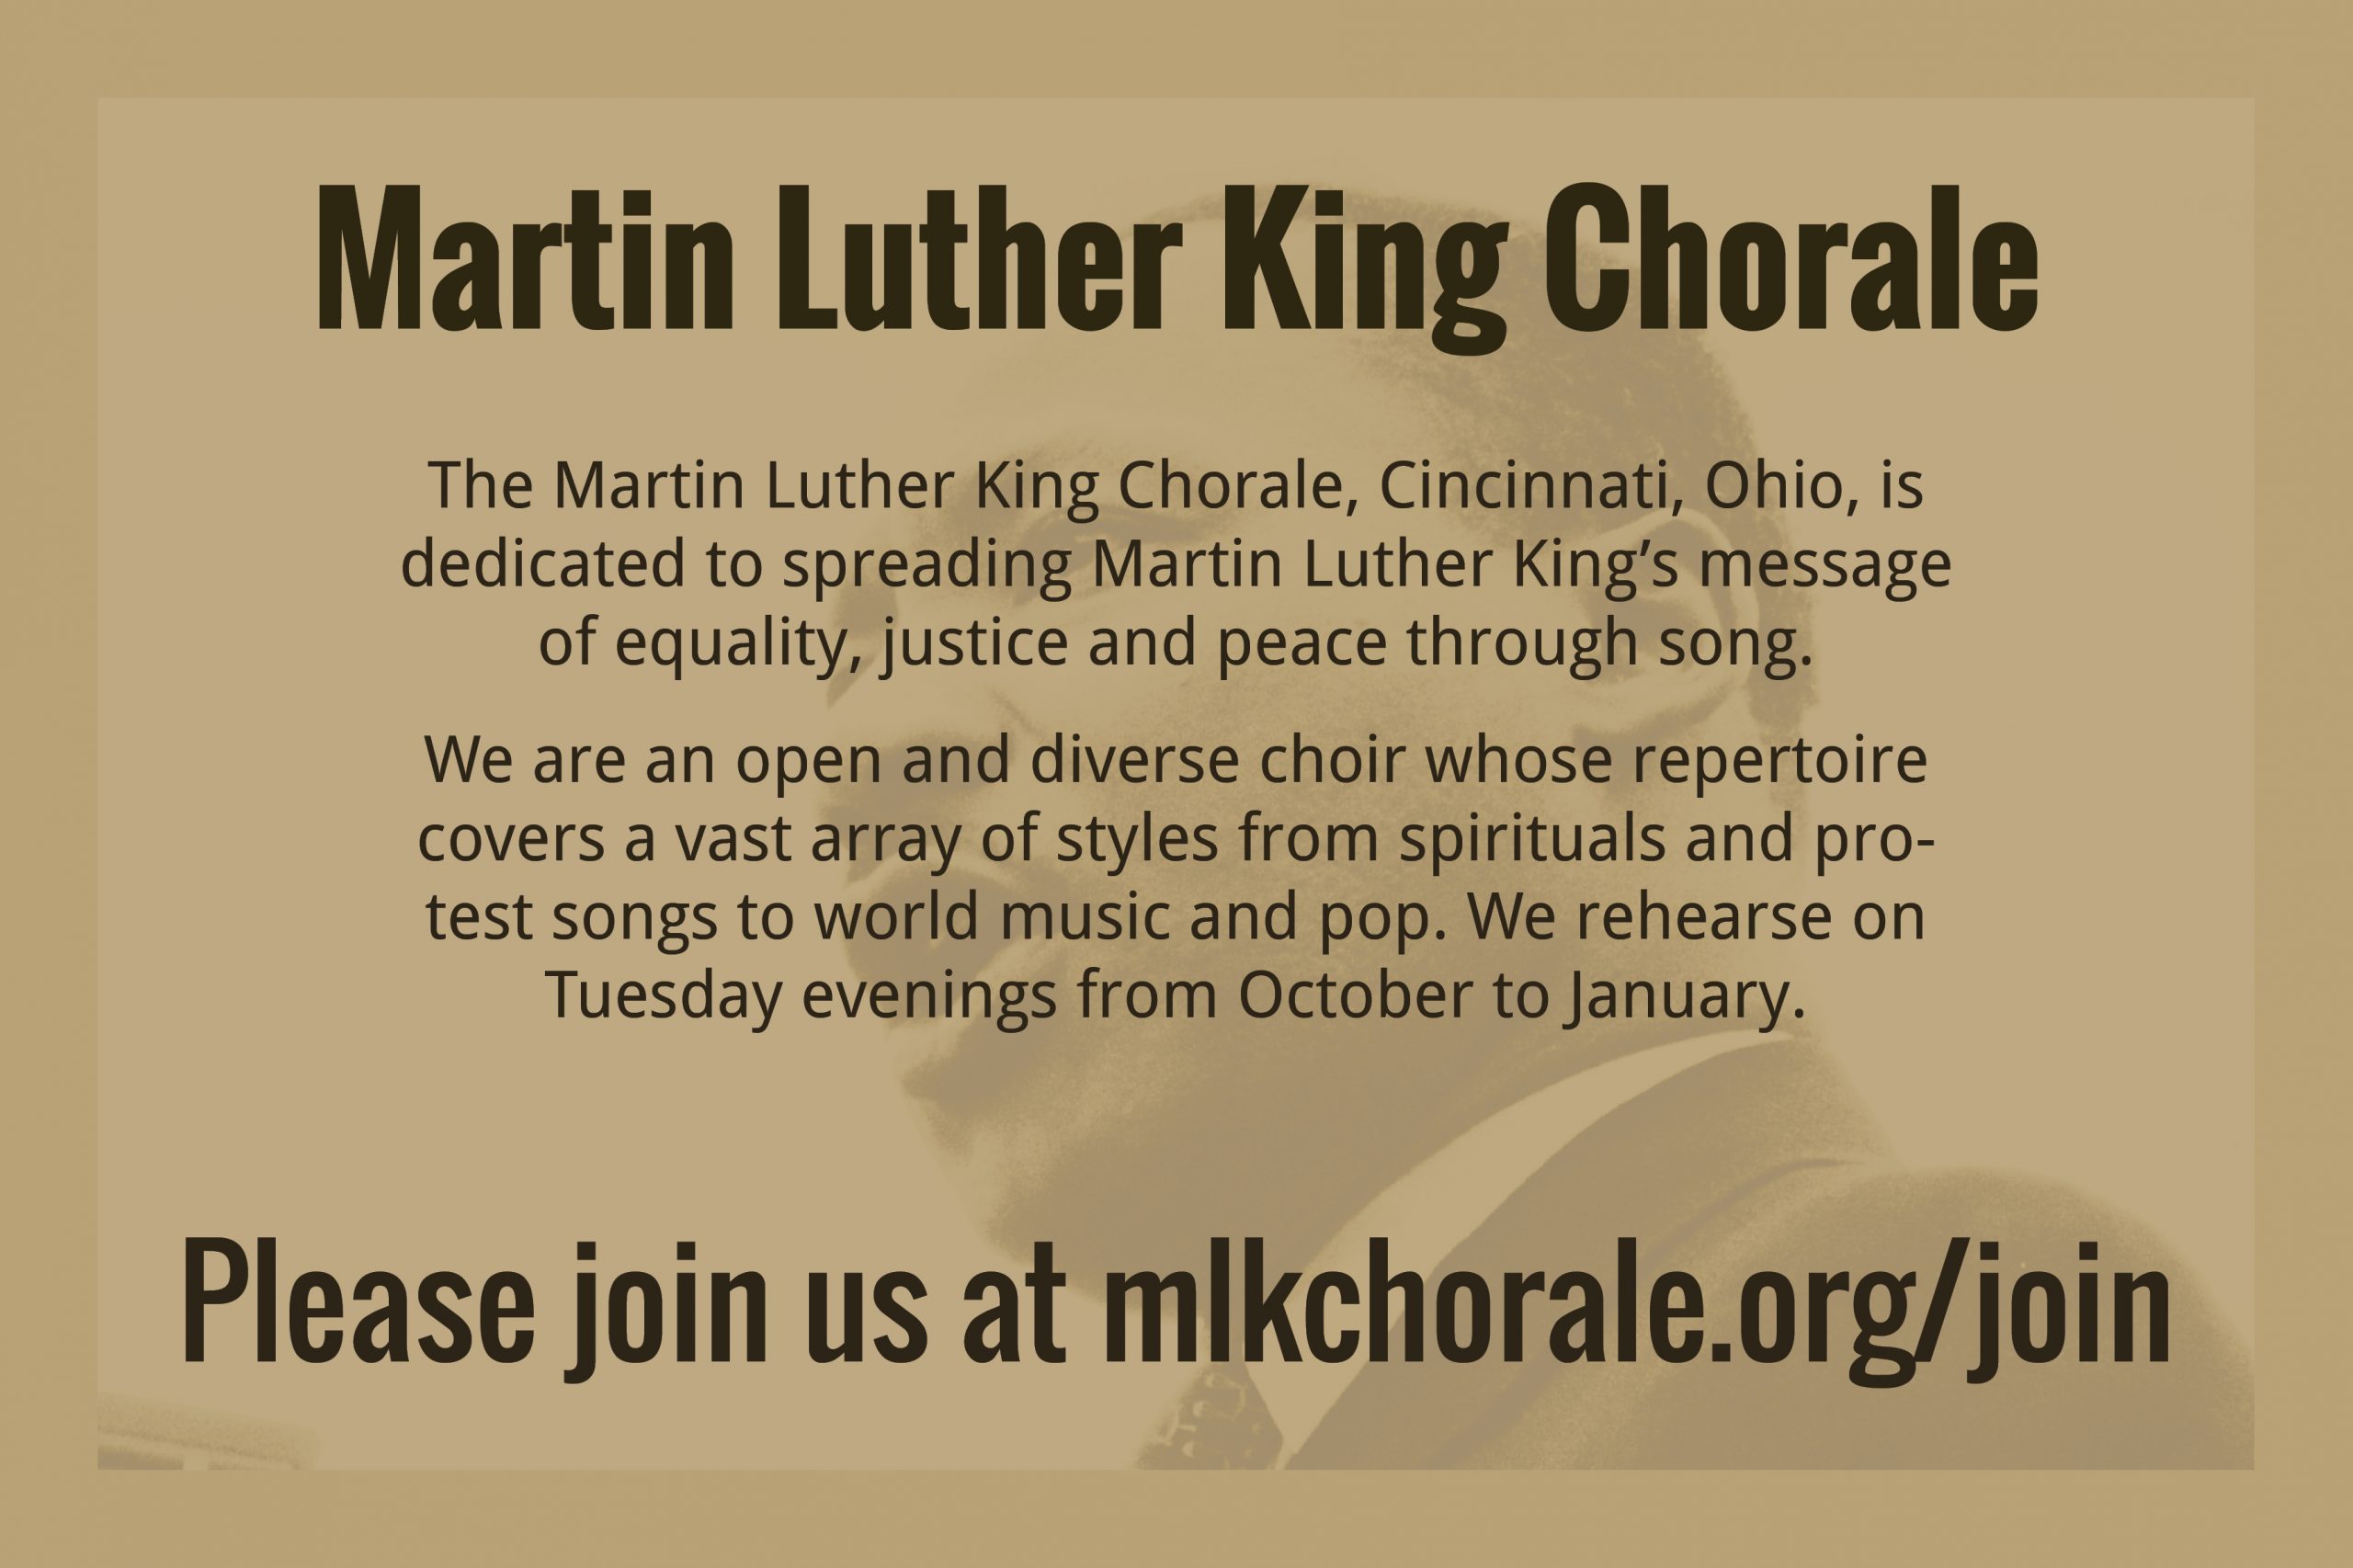 Sing with the Martin Luther King Chorale! mlkchorale.org/join